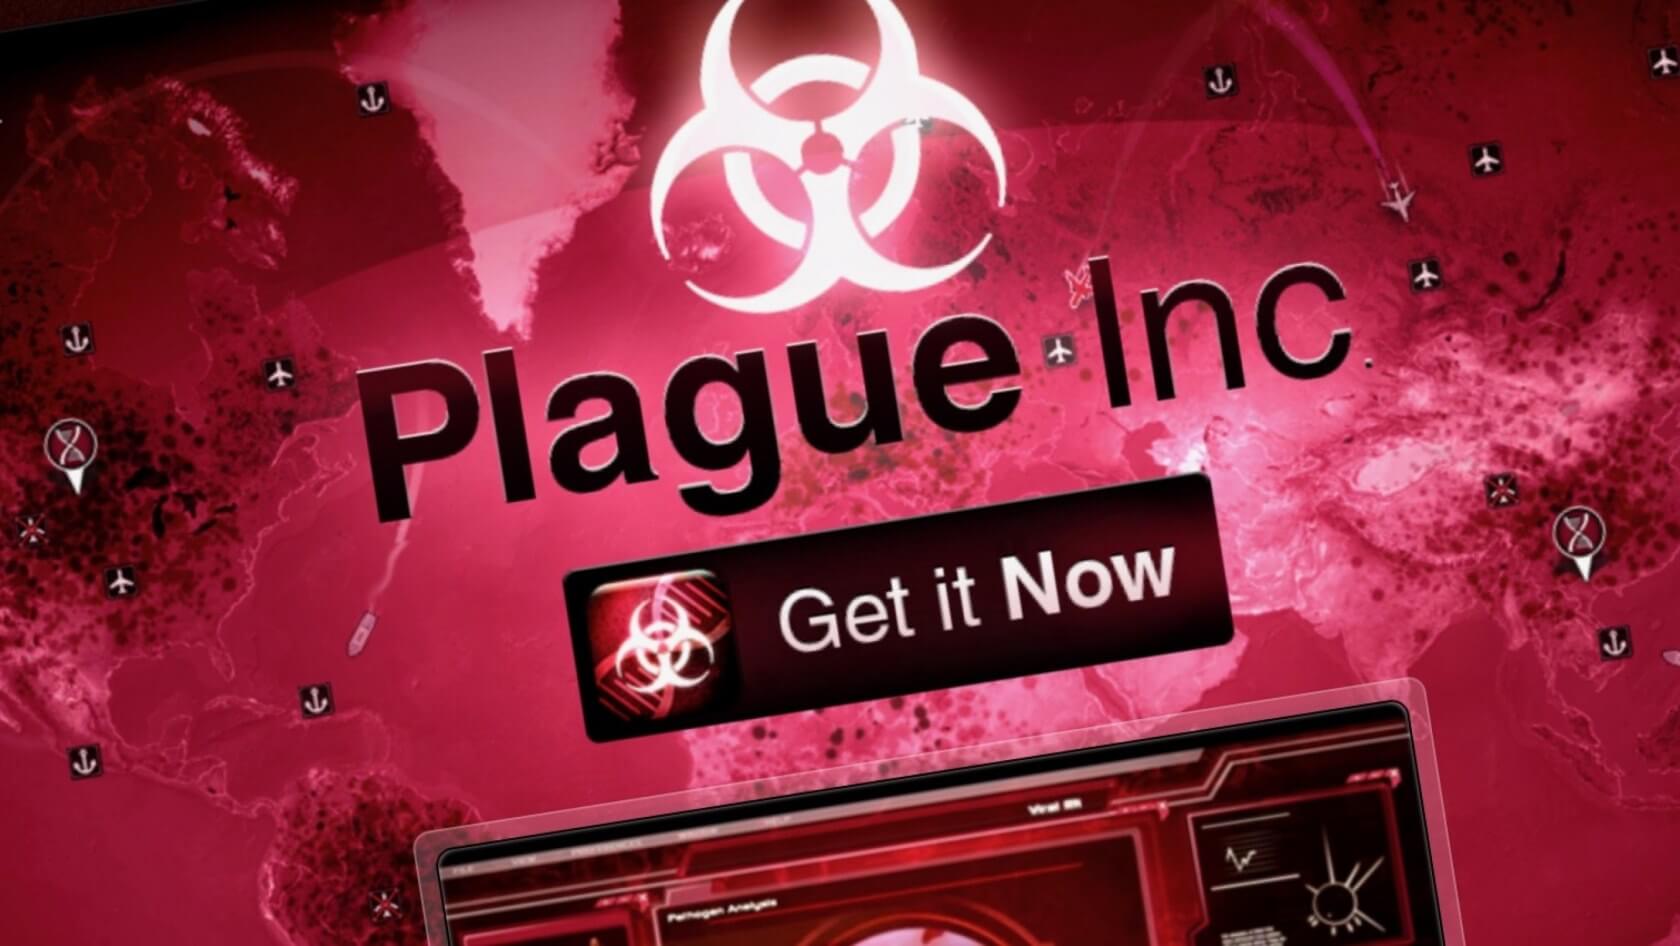 Plague Inc. has been removed from the Chinese App Store